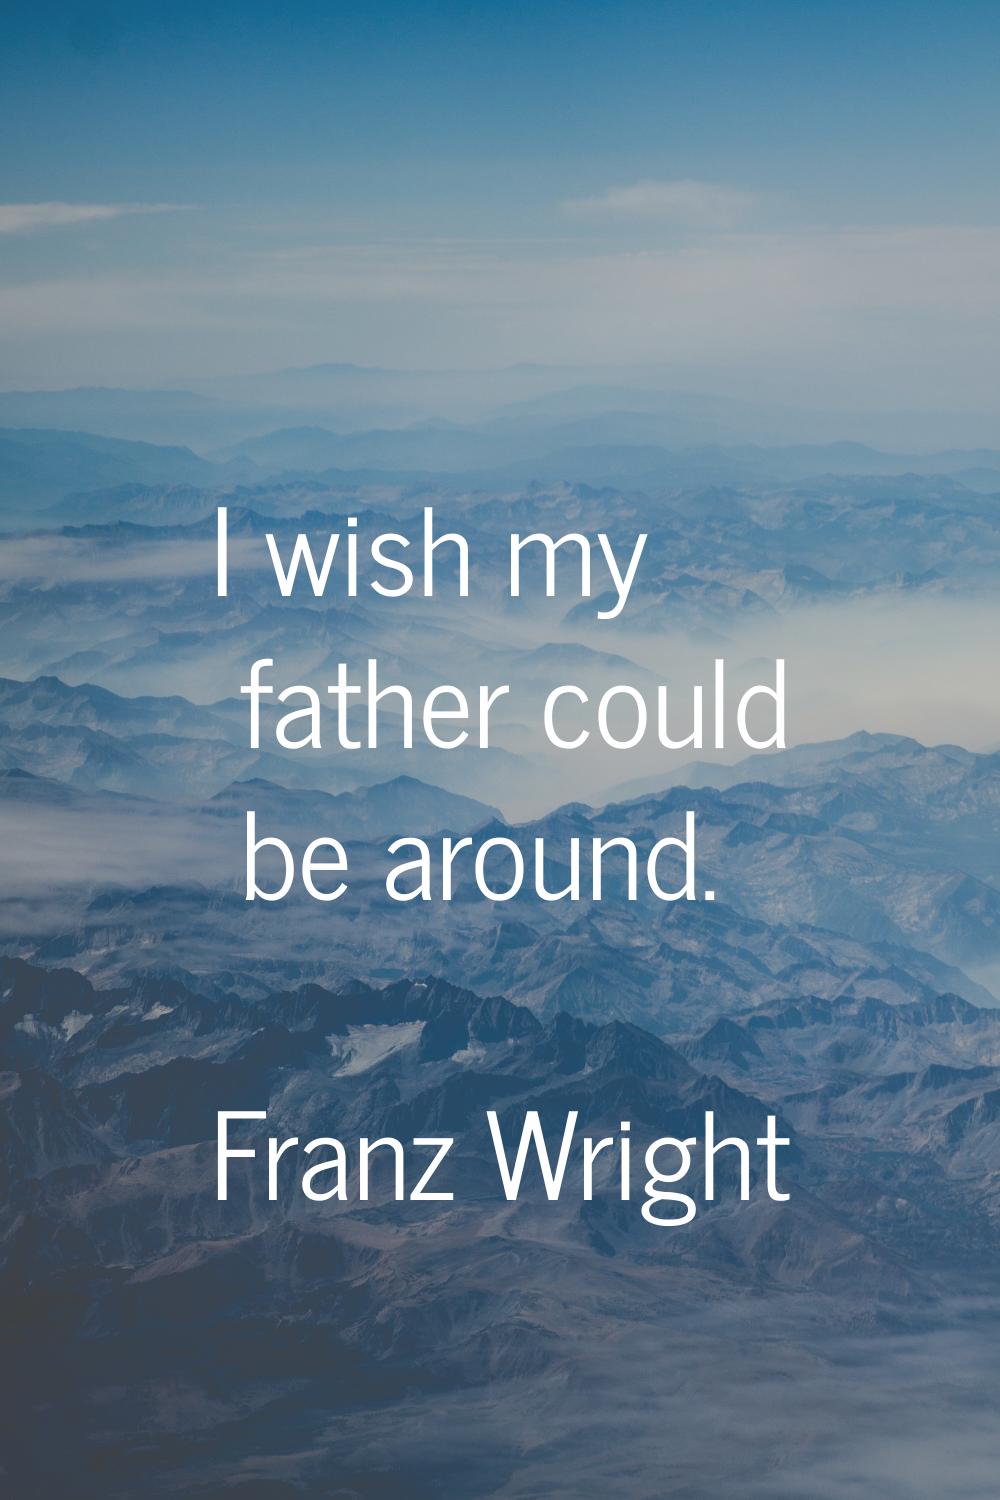 I wish my father could be around.